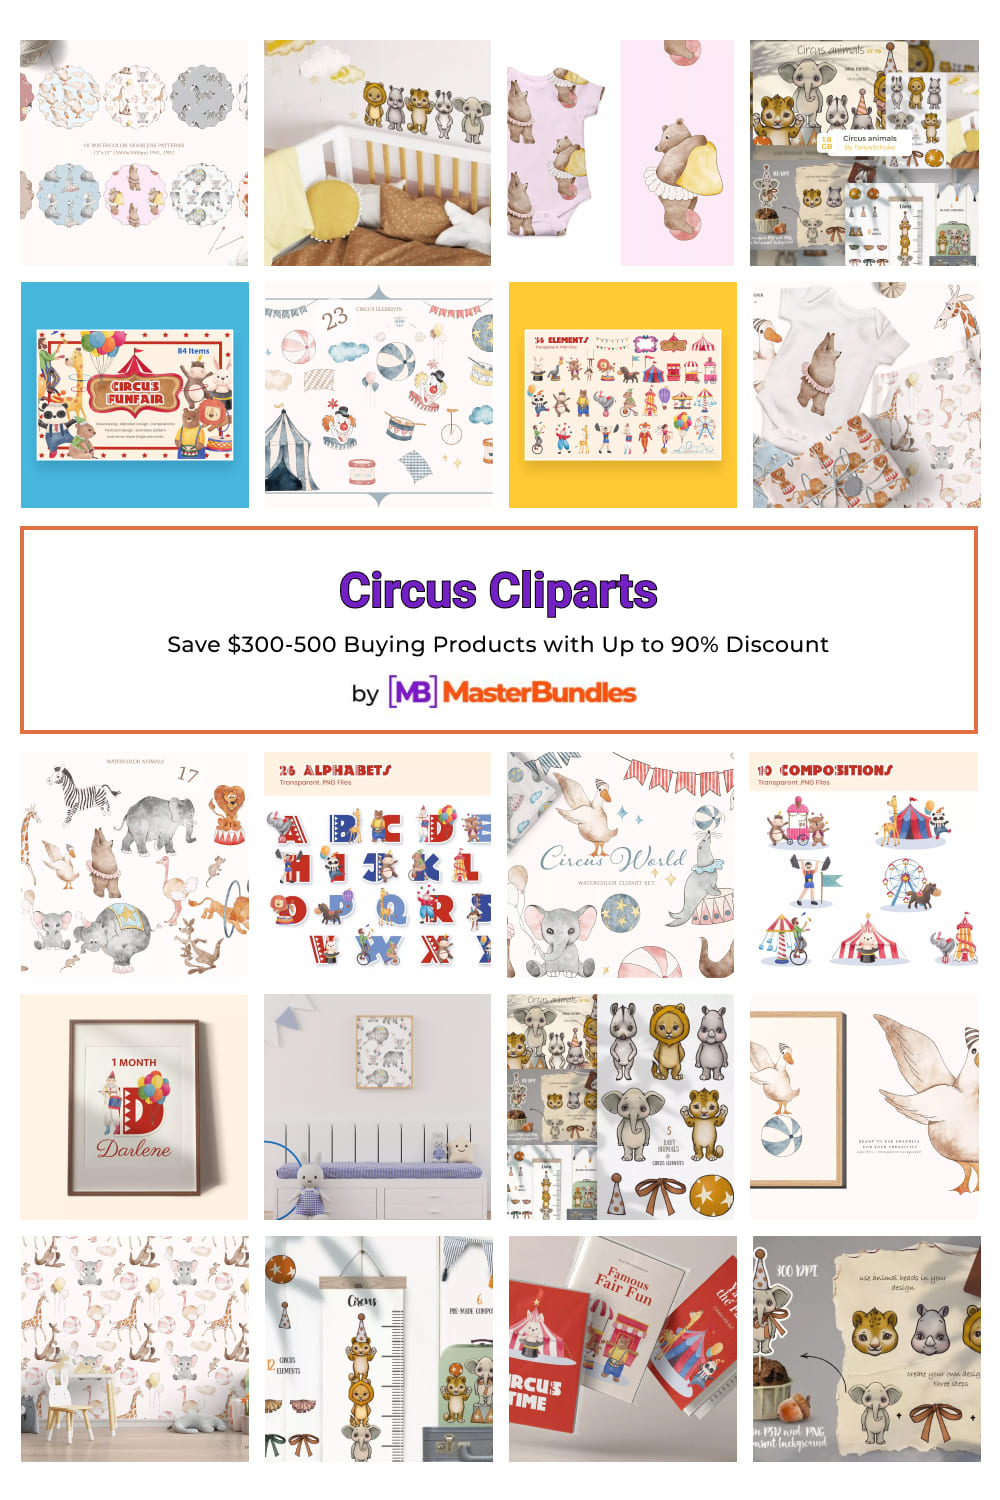 Circus Cliparts for Pinterest.